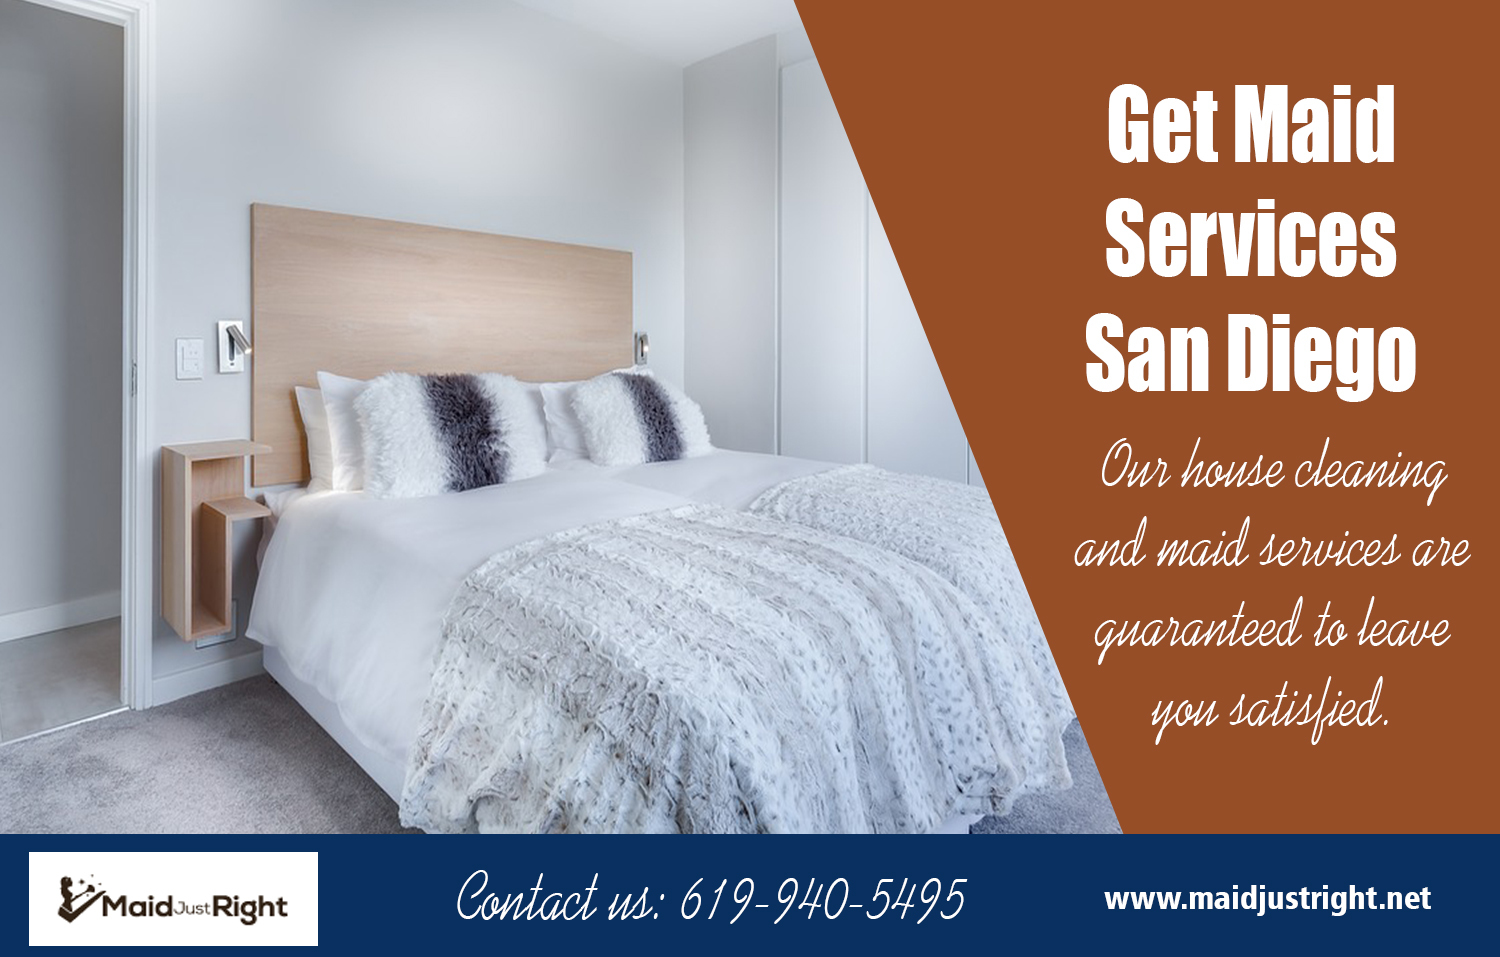 Get Maid Services San Diego | Call Us - 619-940-5495 | maidjustright.net